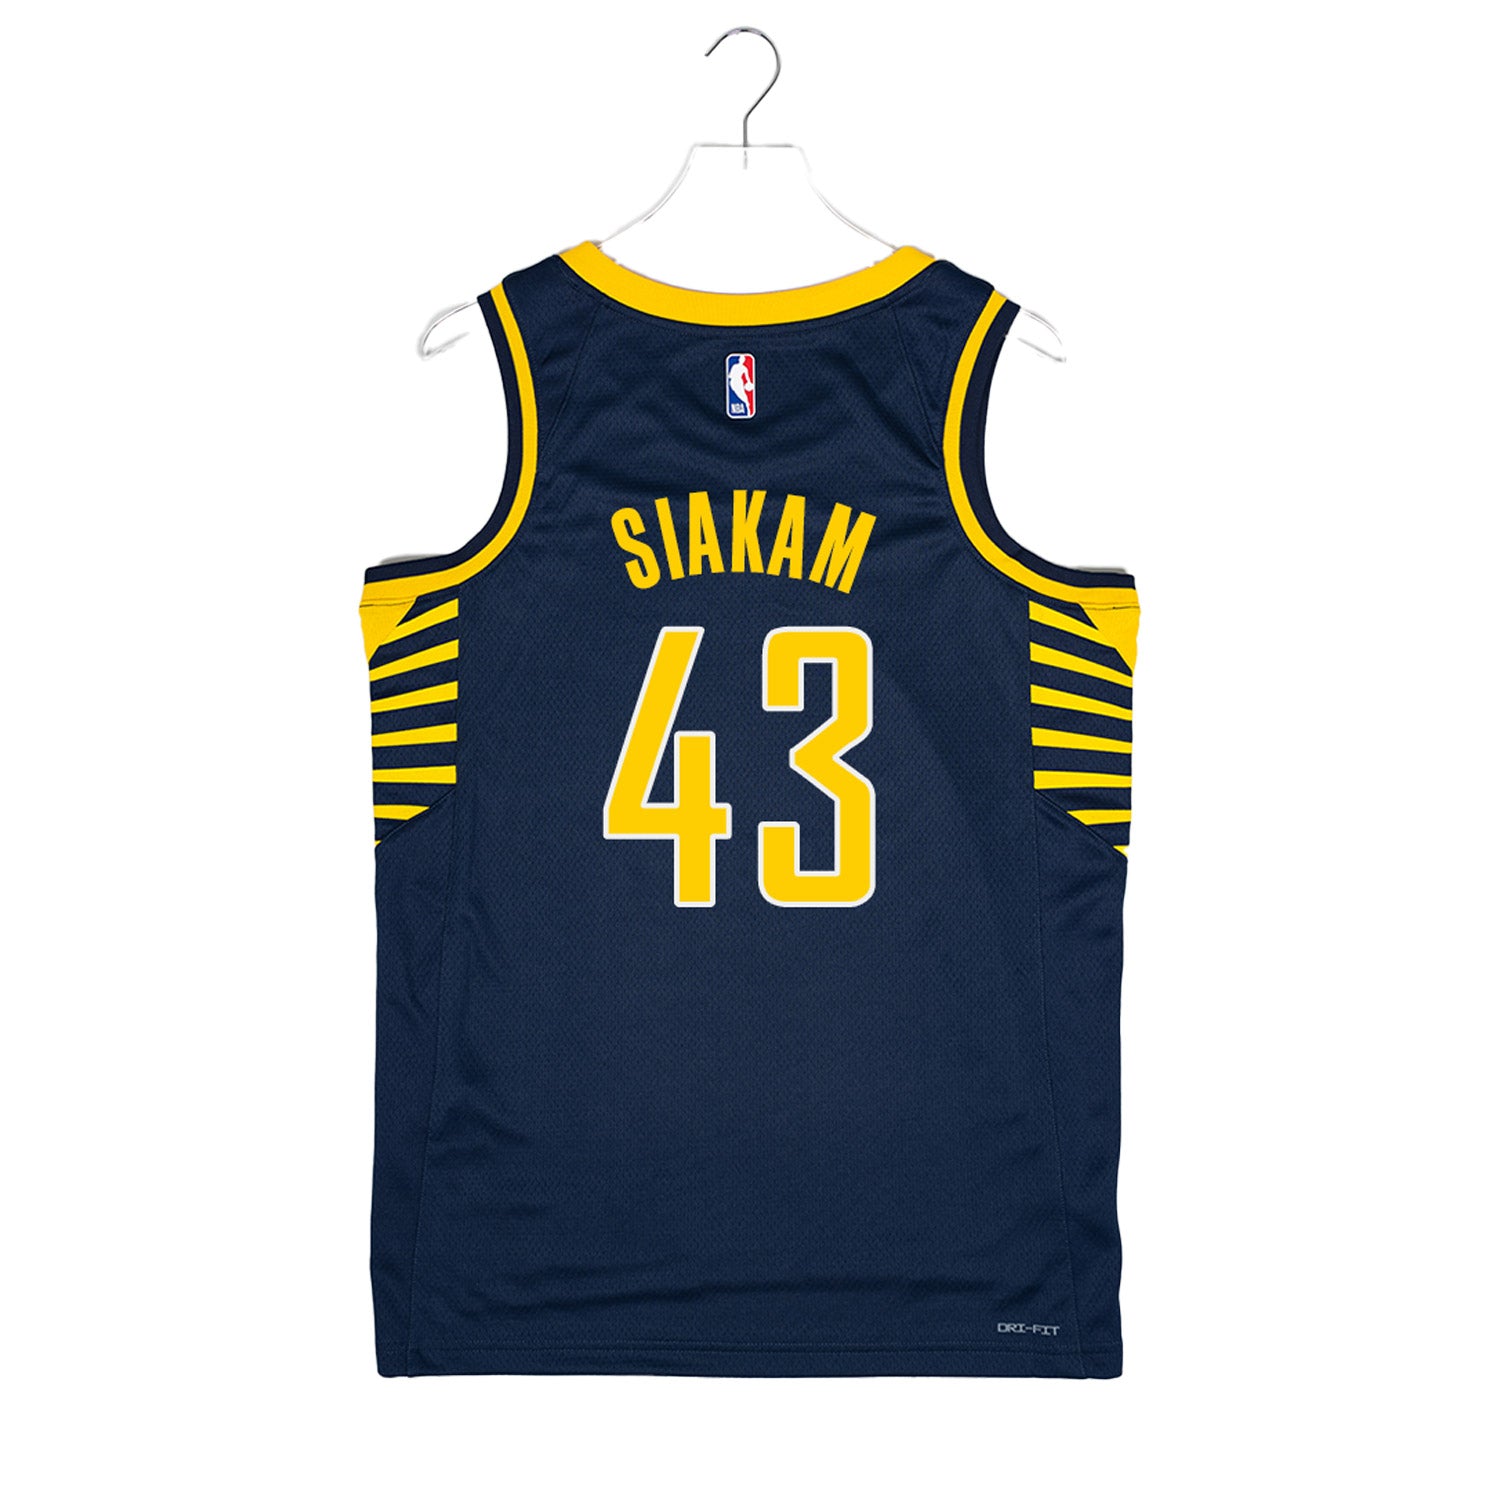 Adult Indiana Pacers #43 Pascal Siakam Icon Swingman Jersey by Nike